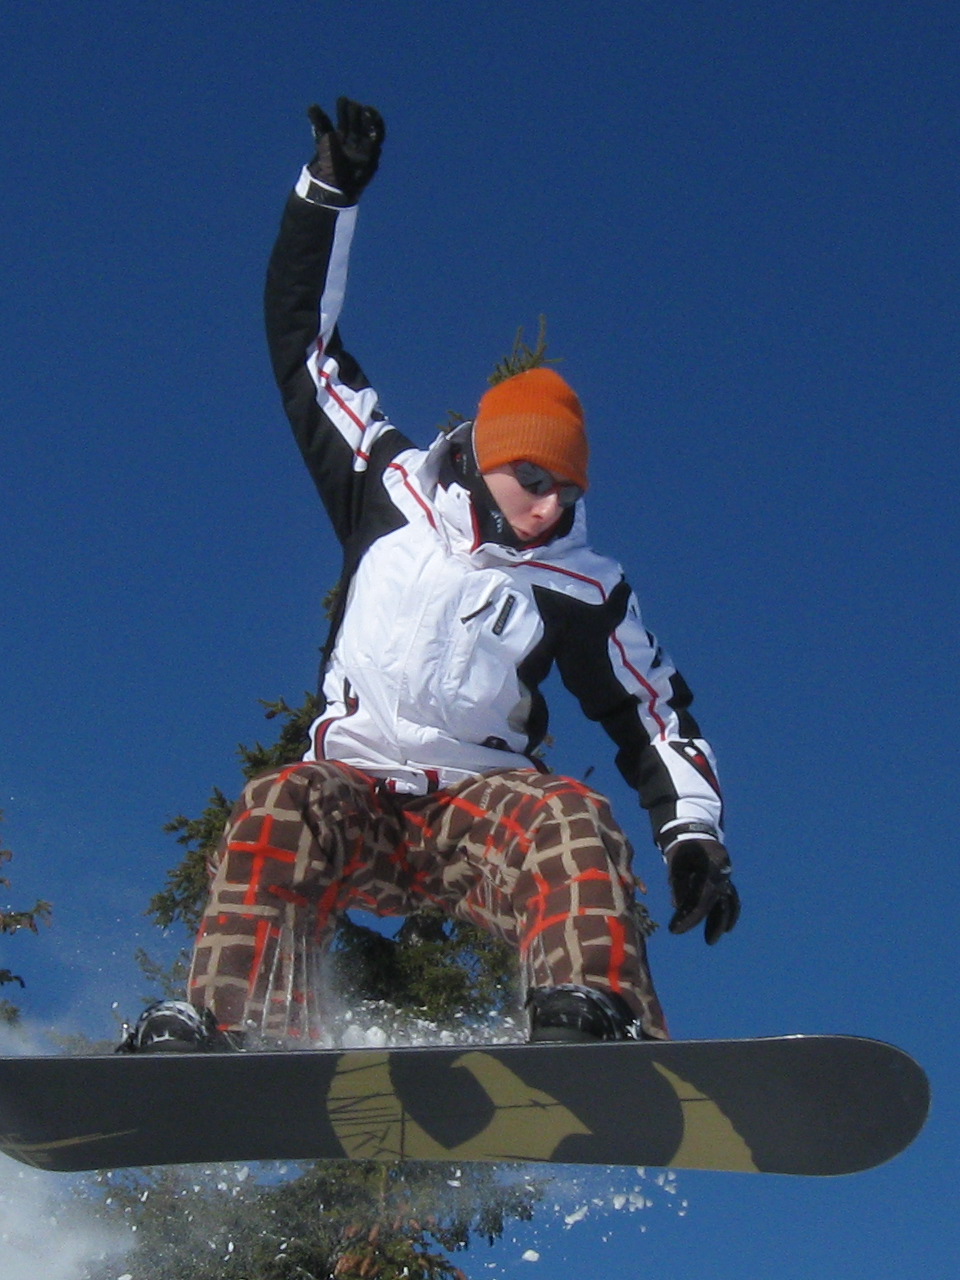 My snowboarding picture